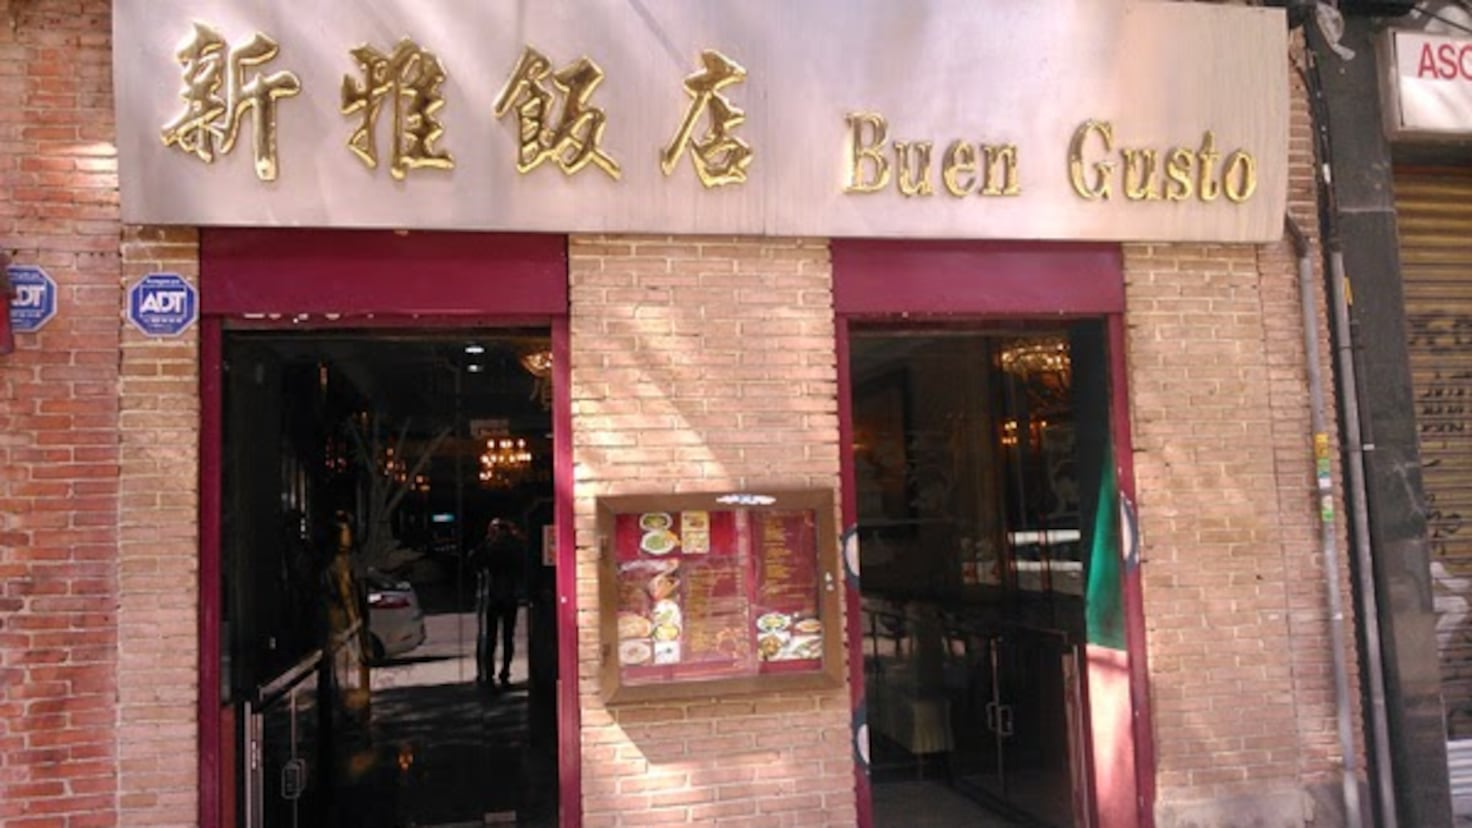 The most legendary Chinese restaurant closes: El Buen Gusto, known as the Chinese law because Juan Carlos I was there